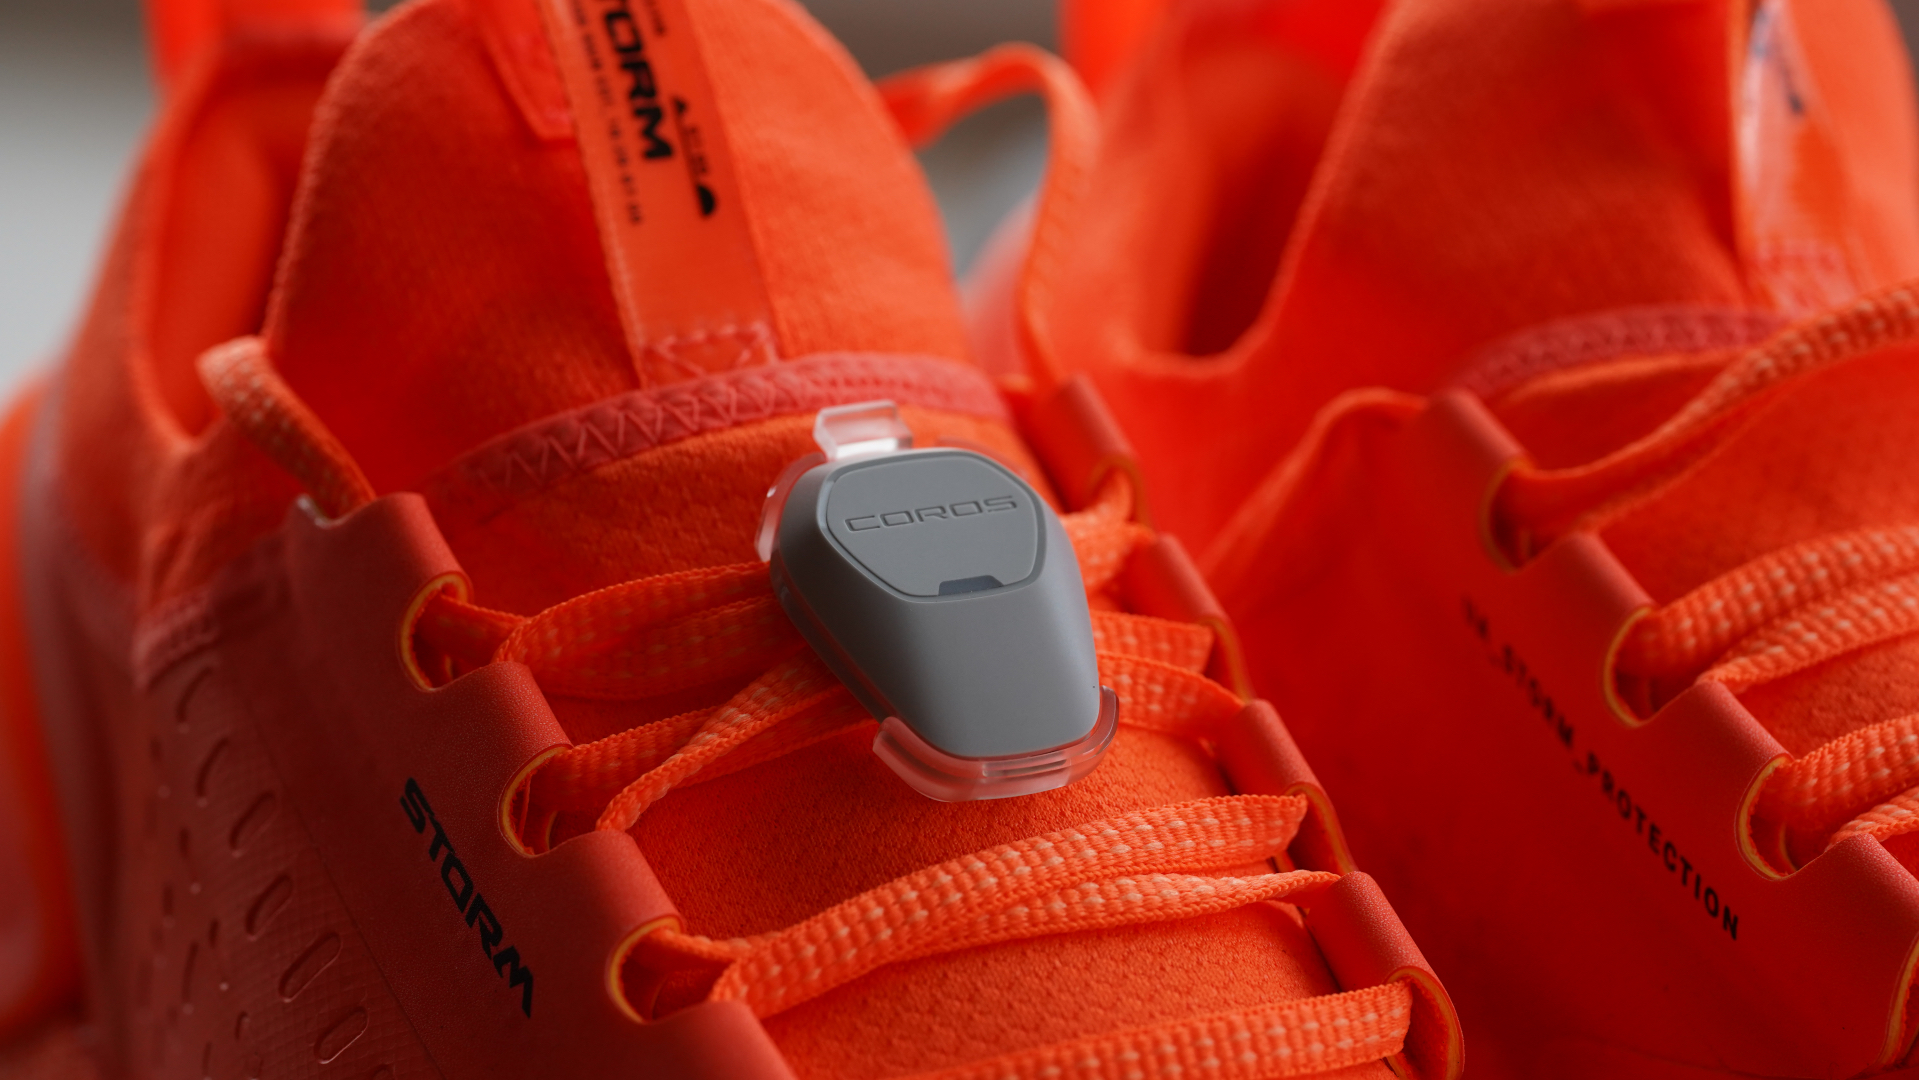 COROS APEX 2 Pro review: Casual runners need not apply